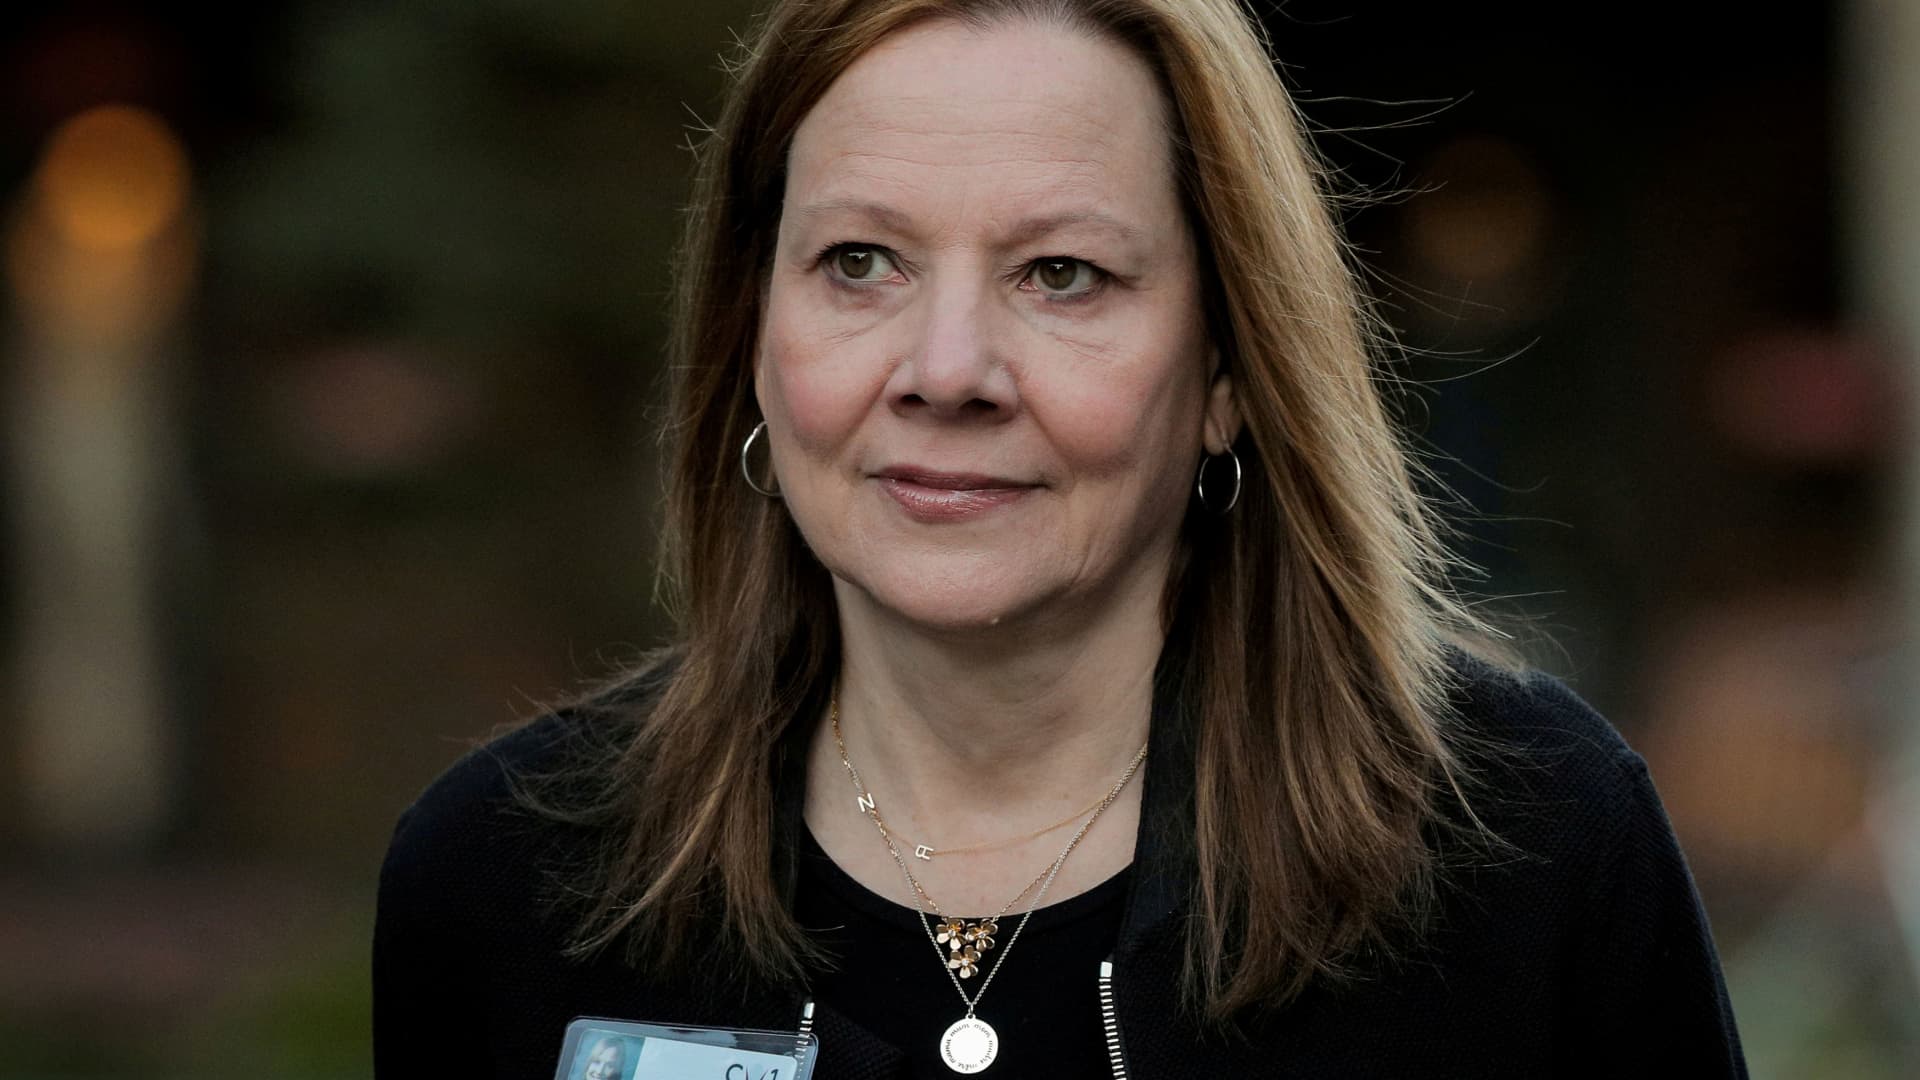 Mary Barra, CEO of General Motors, attends the annual Allen and Co. Sun Valley media conference in Sun Valley, Idaho, July 12, 2019.